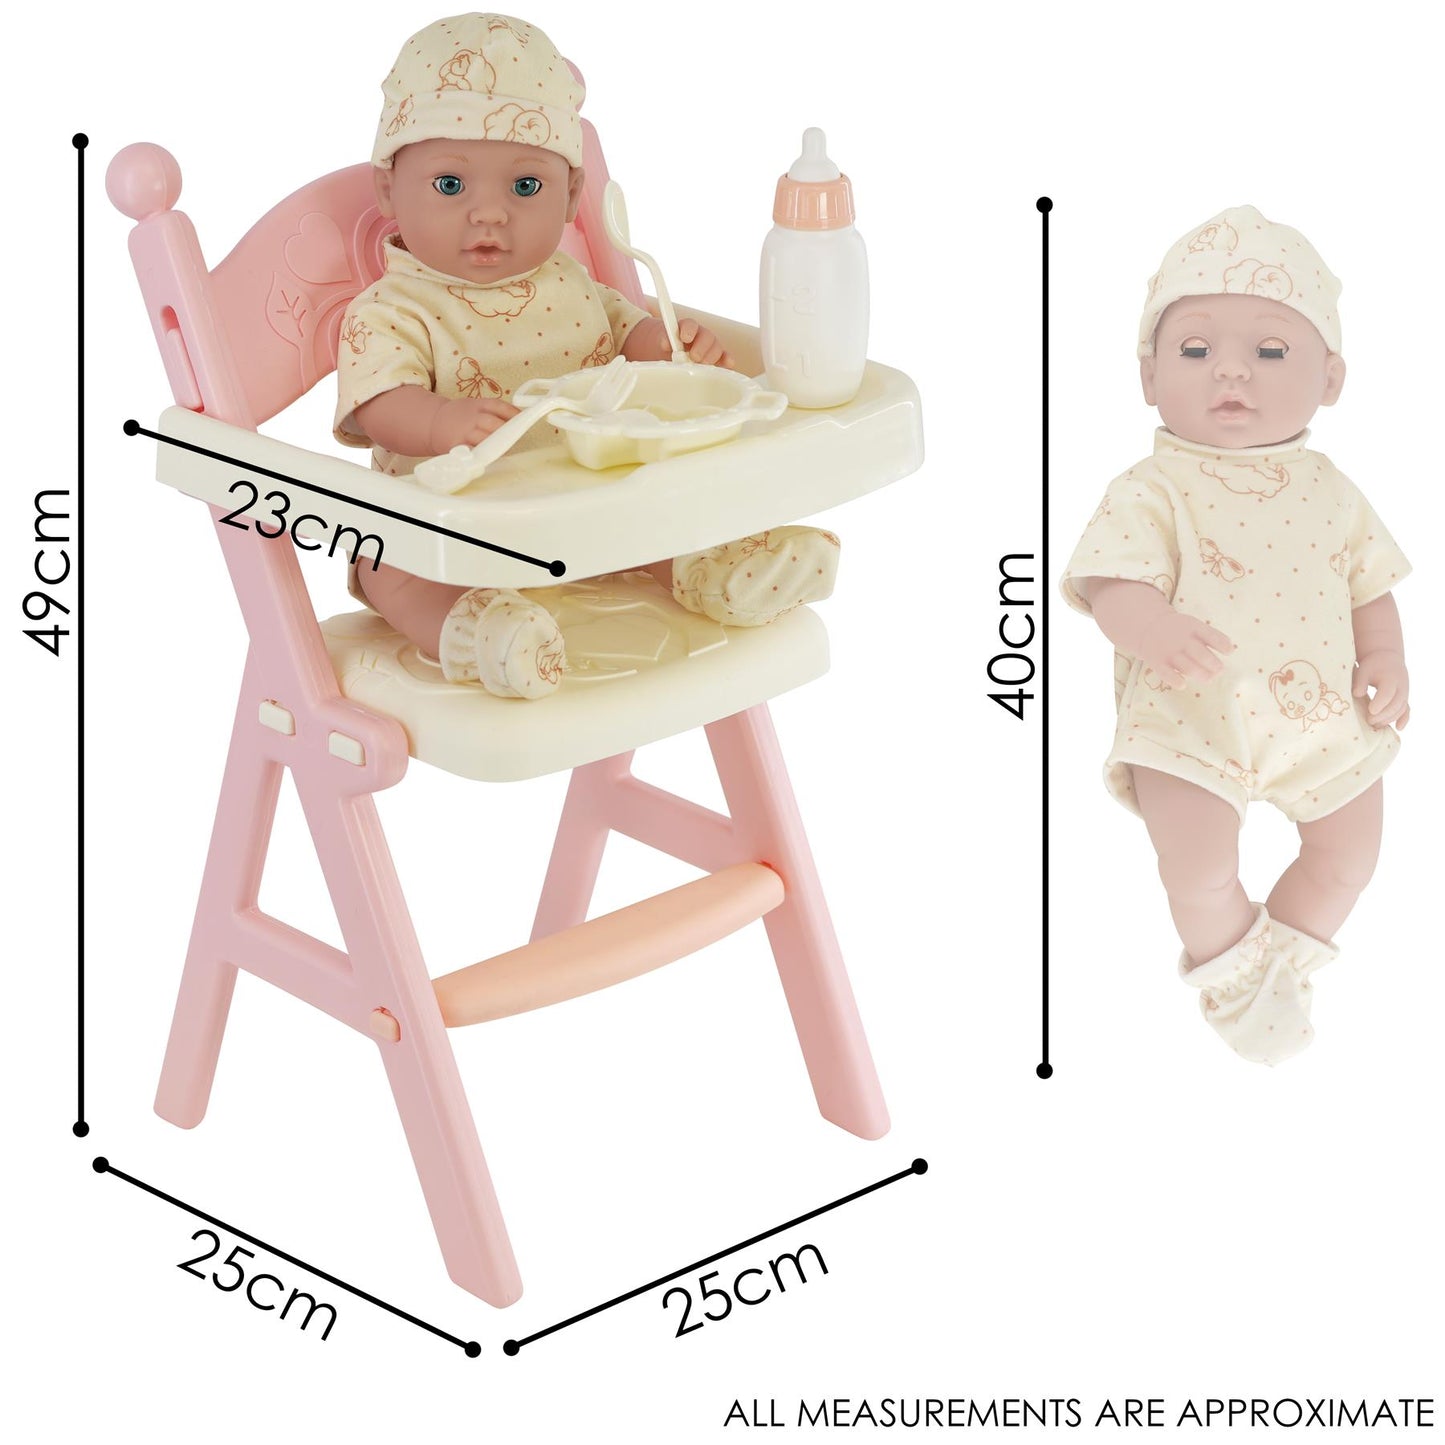 Baby Doll with Feeding High Chair & Accessories by BiBi Doll - UKBuyZone